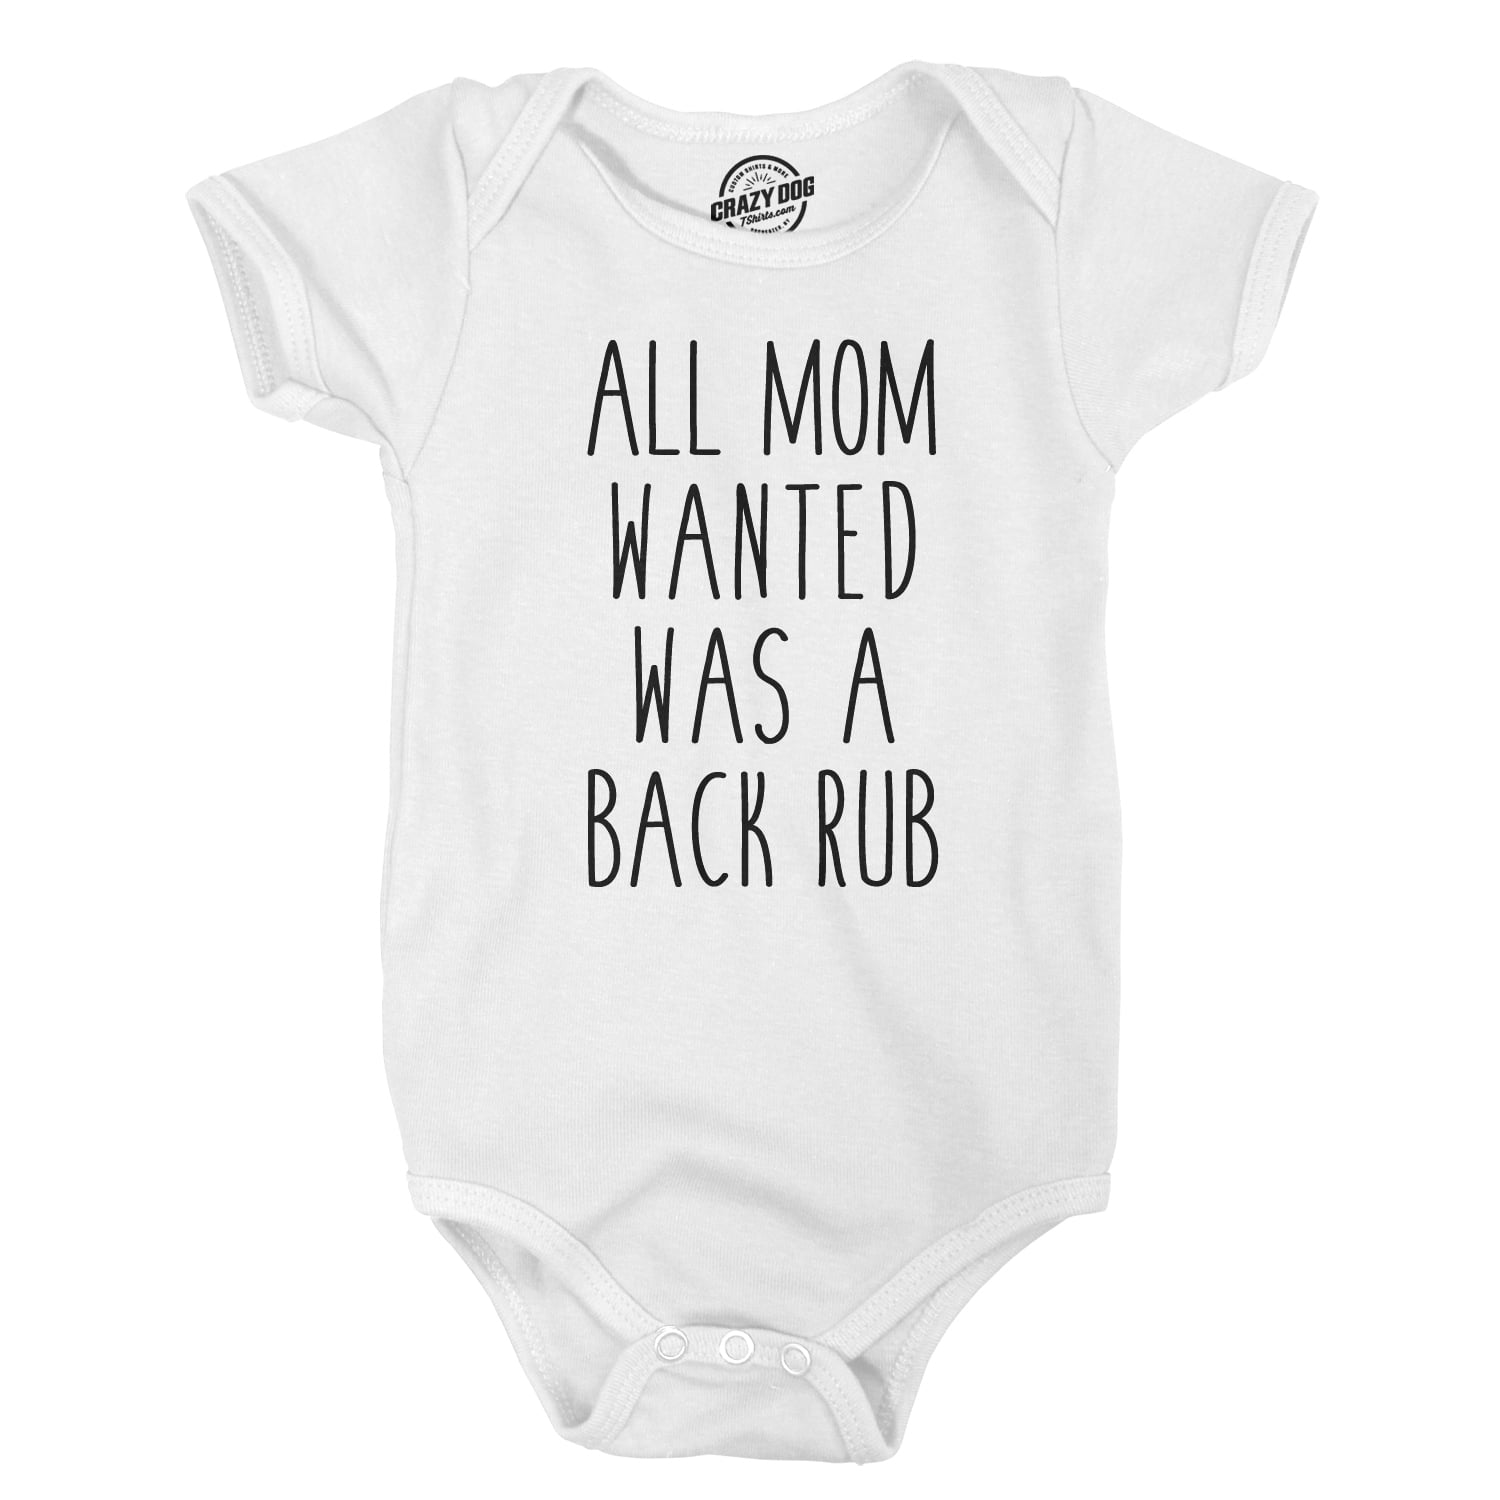 Your Mom  My Mom  funny baby Onesie Romper Makes a Great Shower 